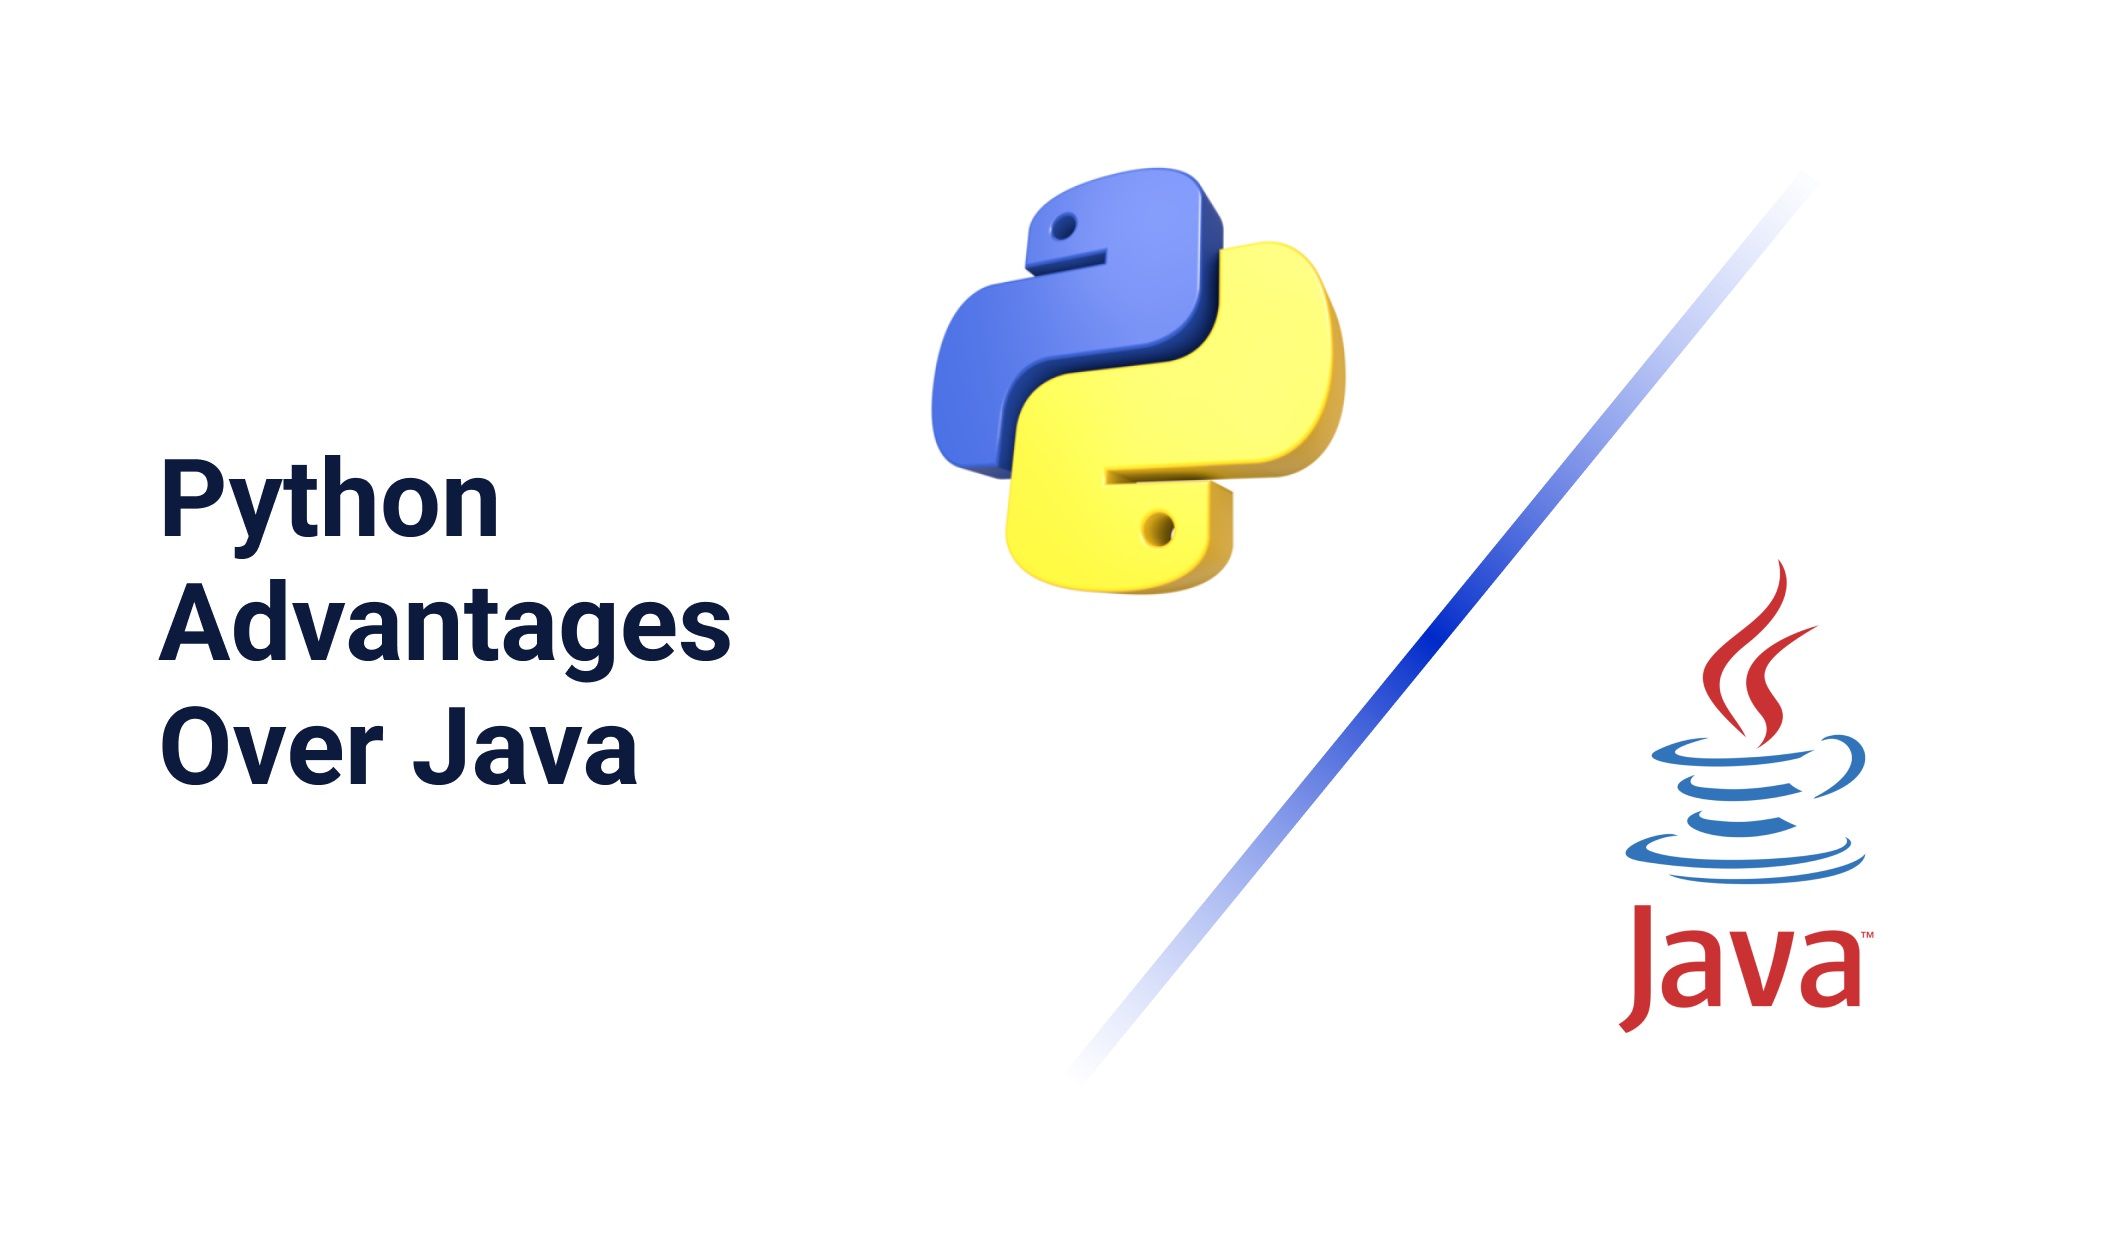 What Are the Python Advantages Over Java?